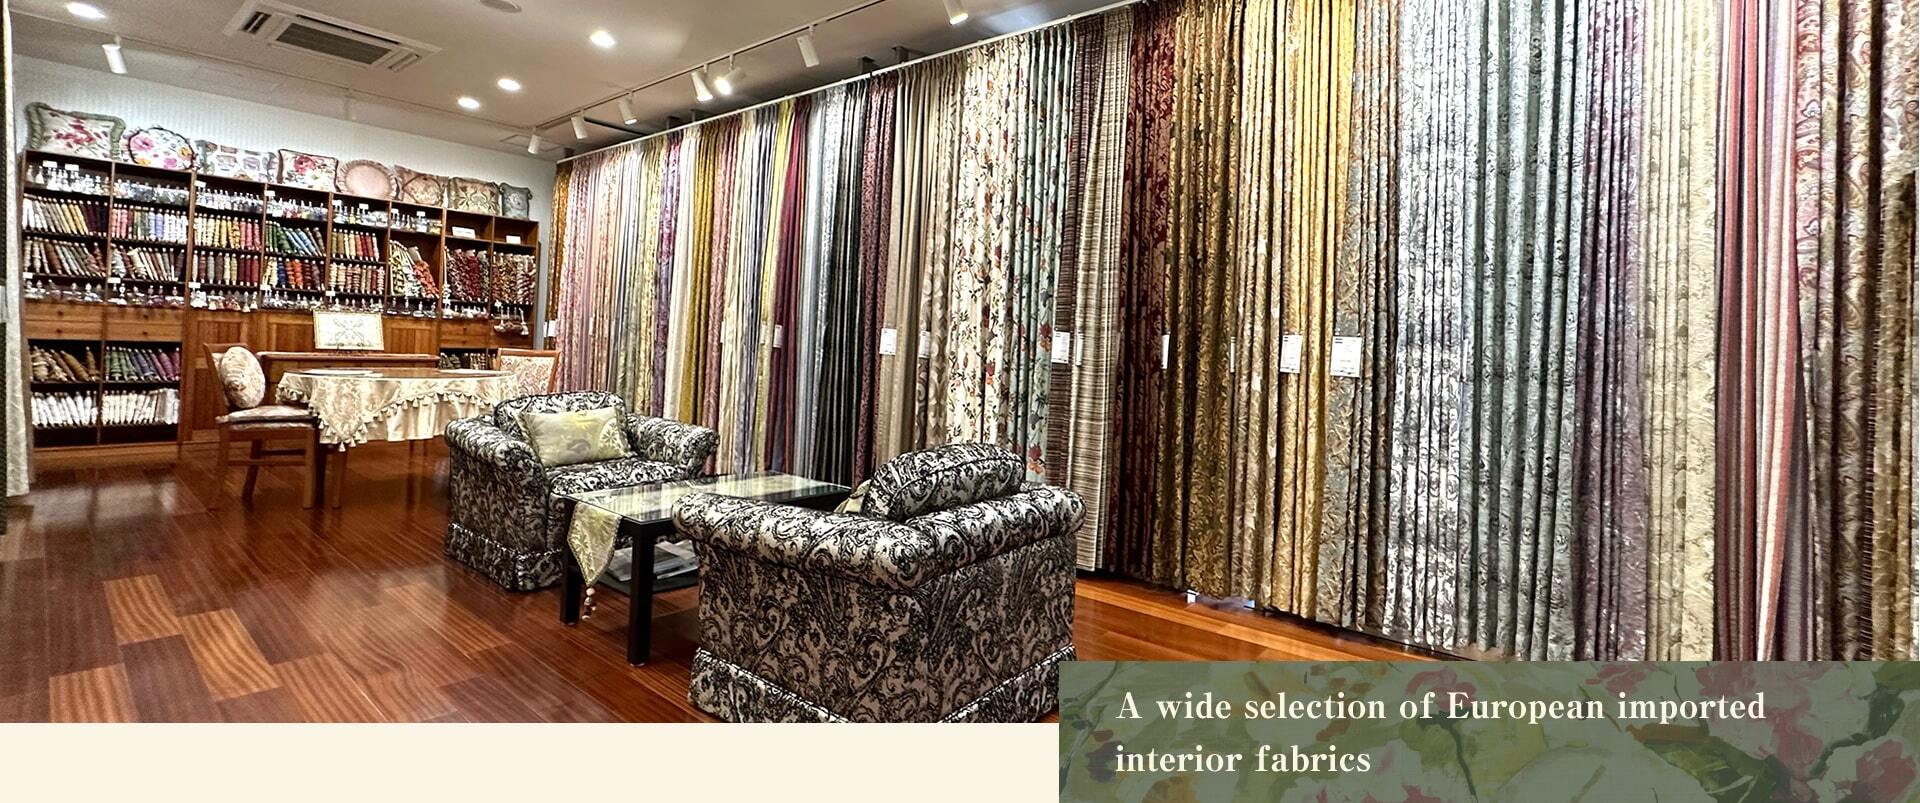 A wide selection of European imported interior fabrics